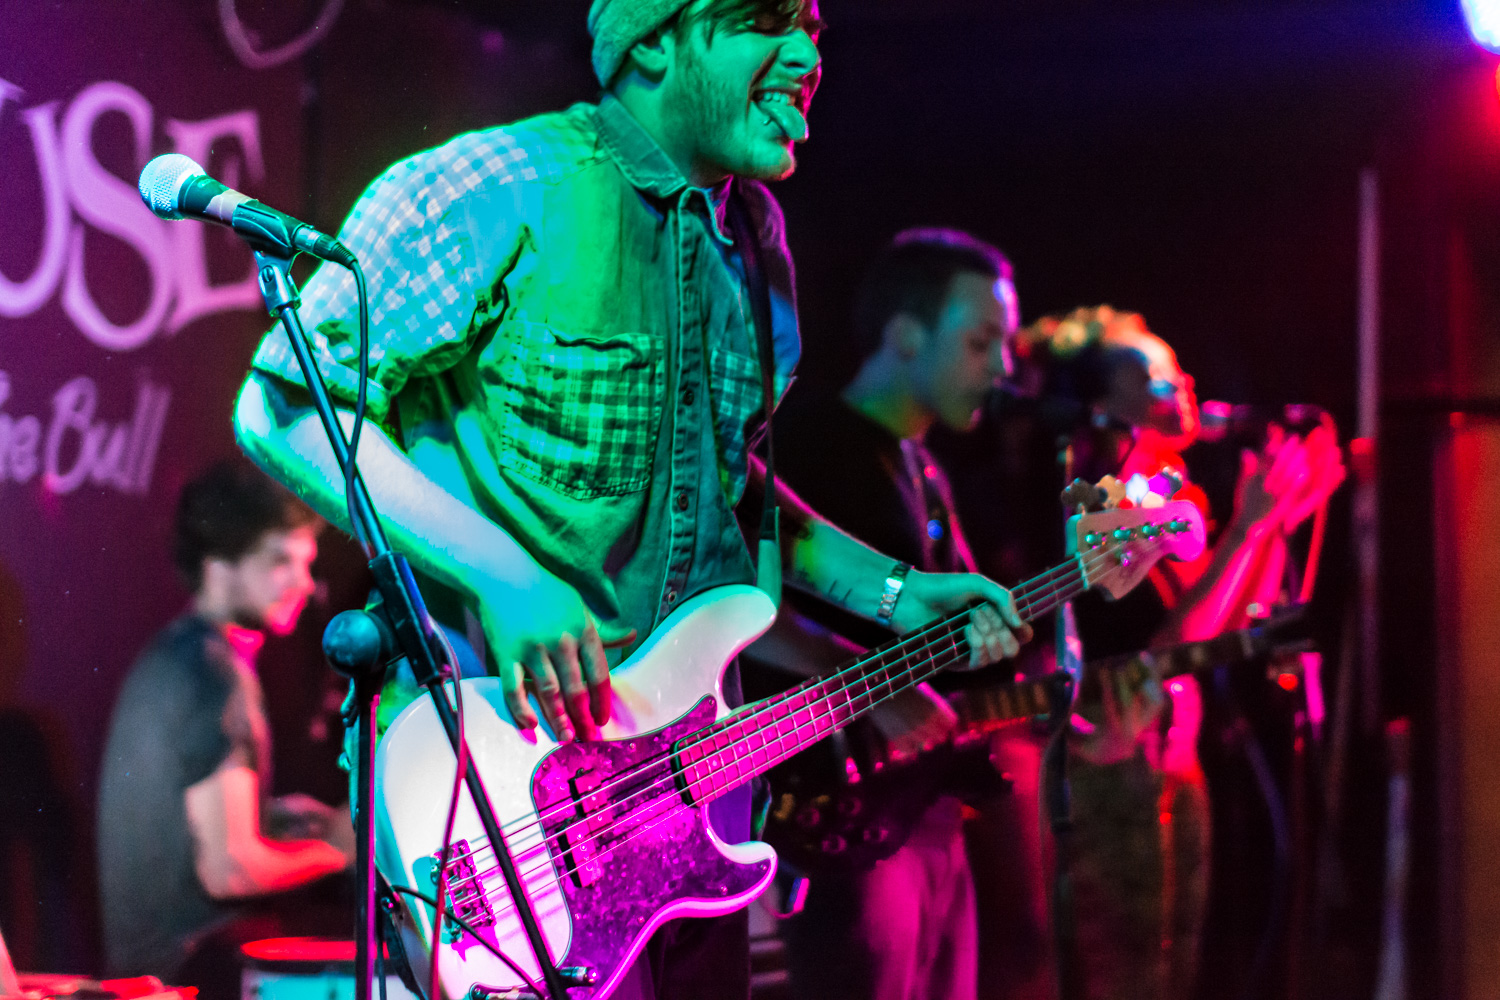 Band picture of bassist with tongue out